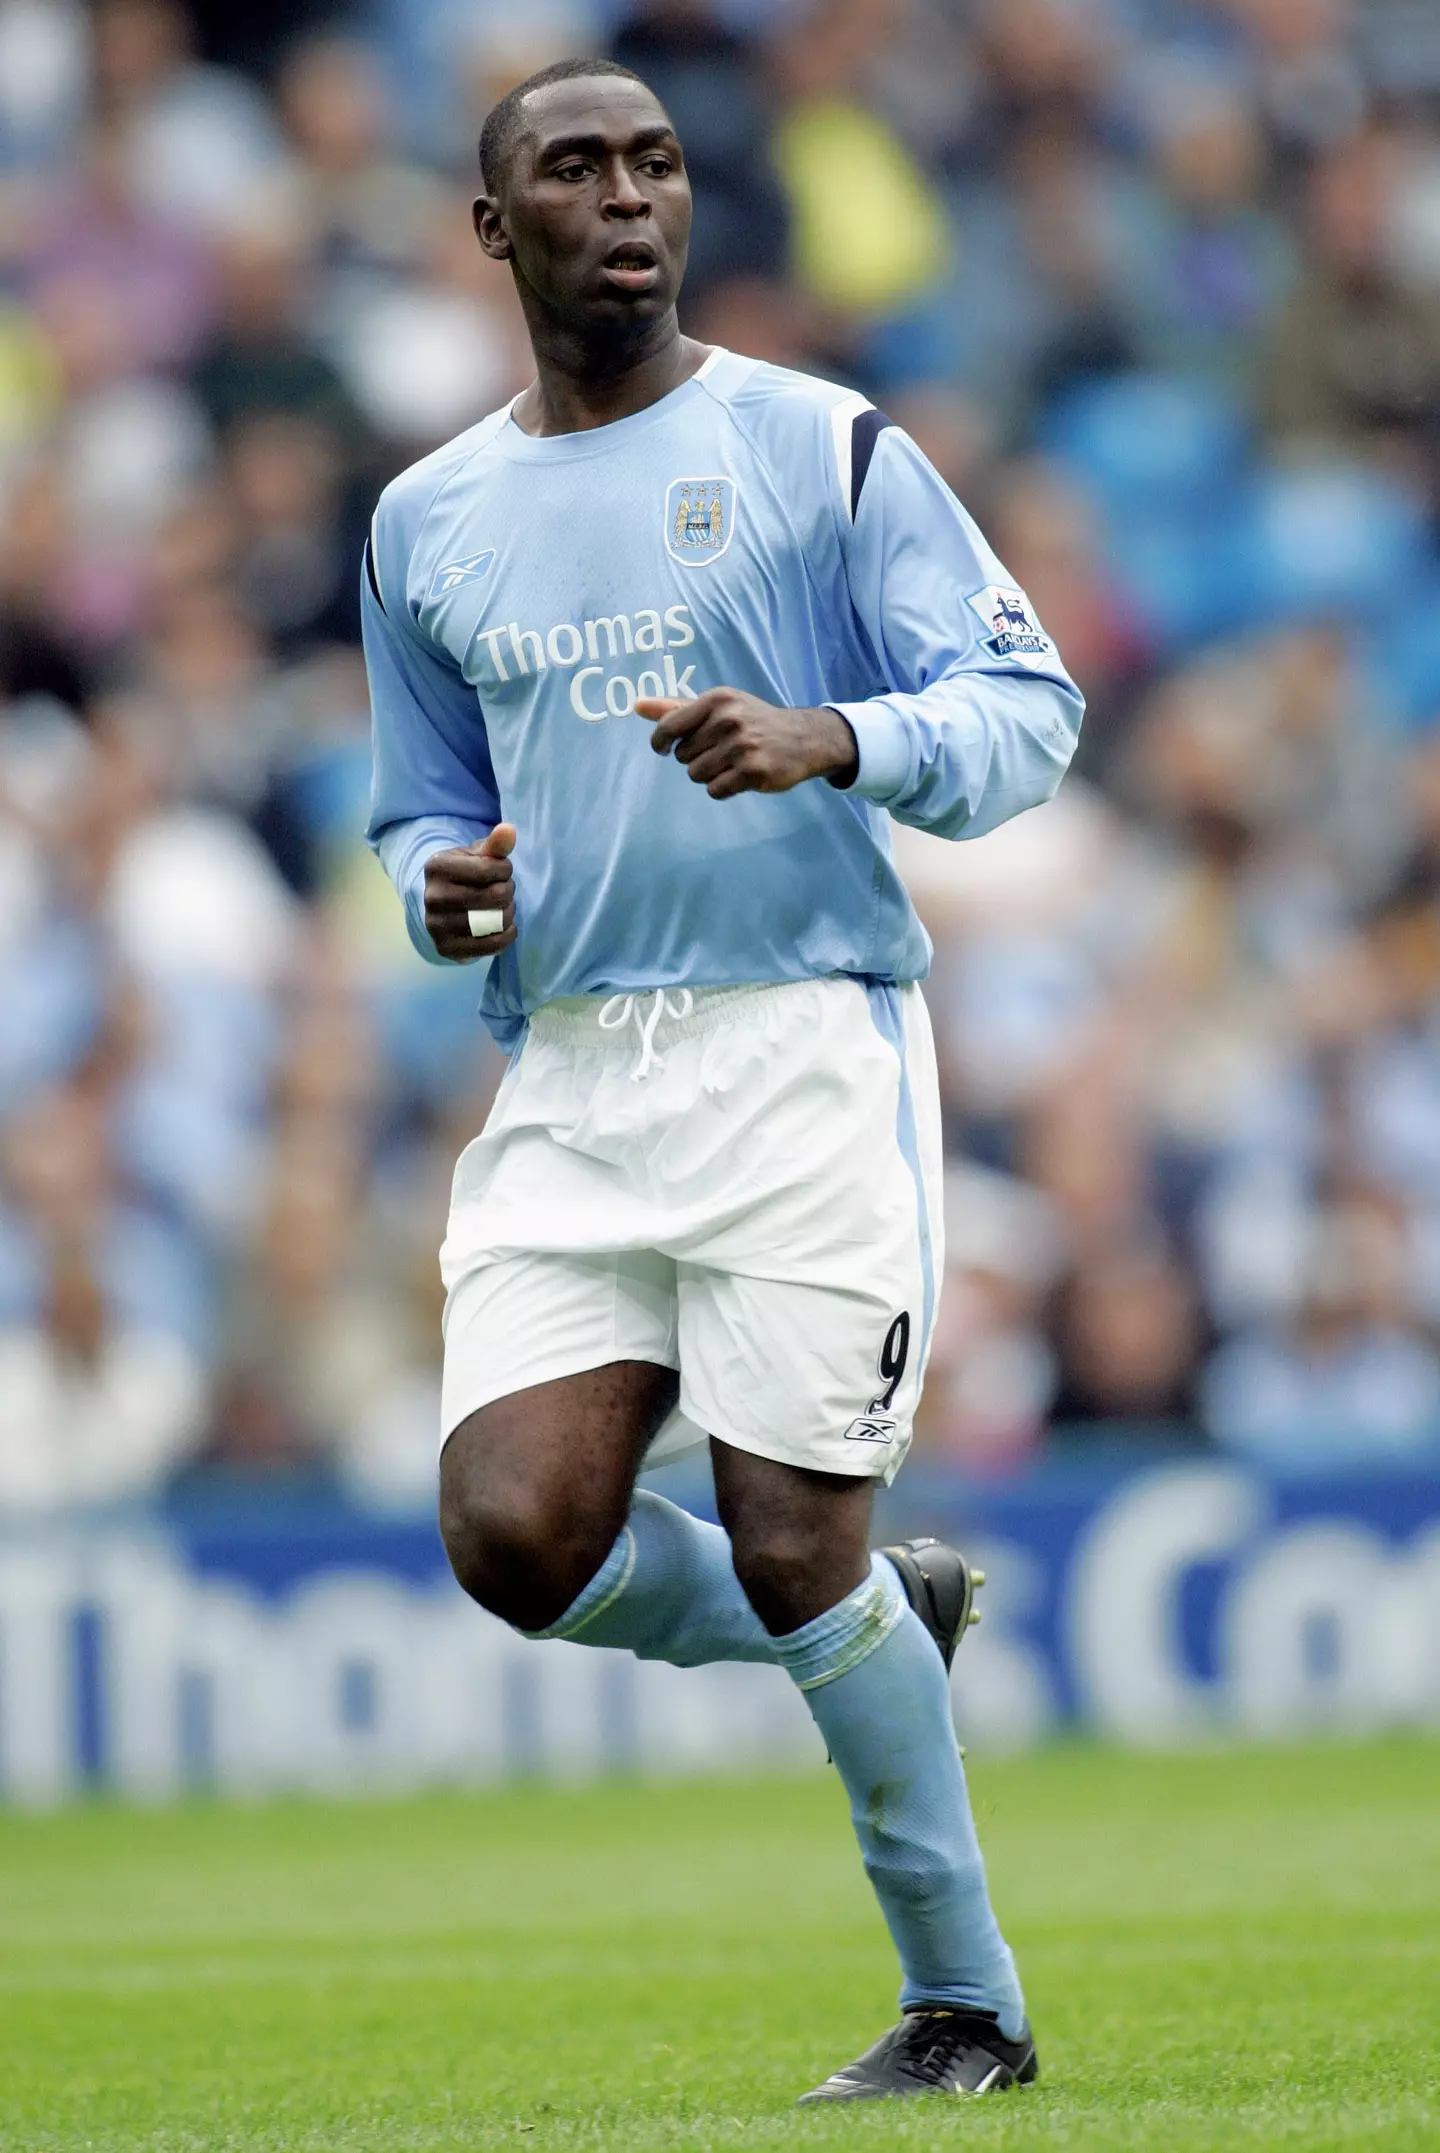 Richards says Andrew Cole gave him an invaluable piece of advice while at Man City (Image: Alamy)